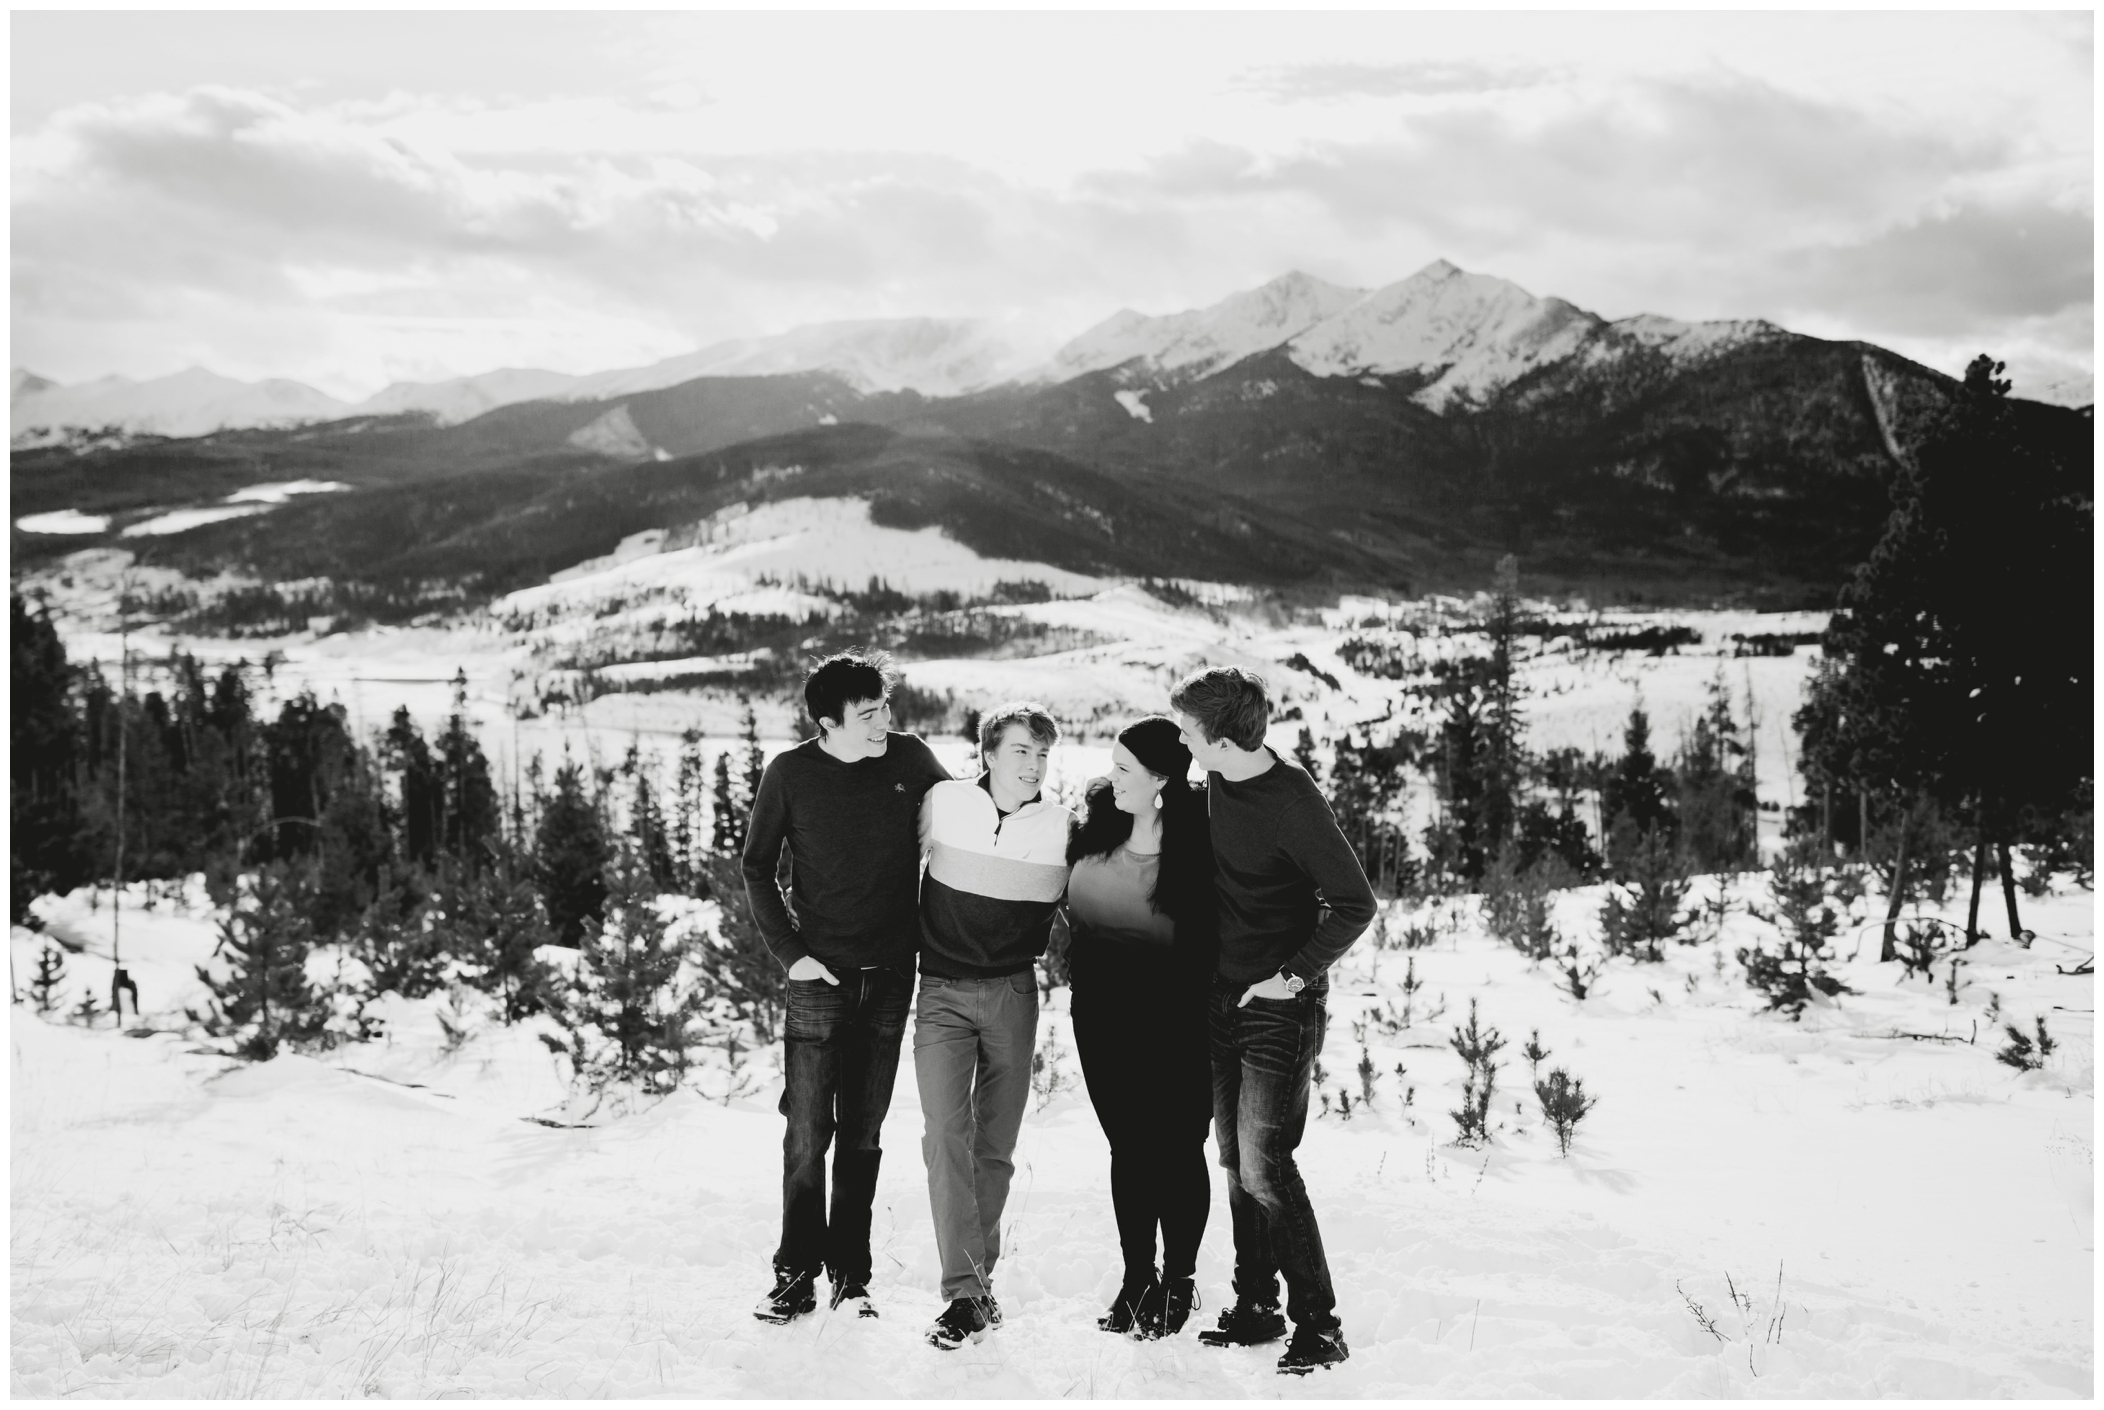 Breckenridge family photography during winter with snowy mountains in the background